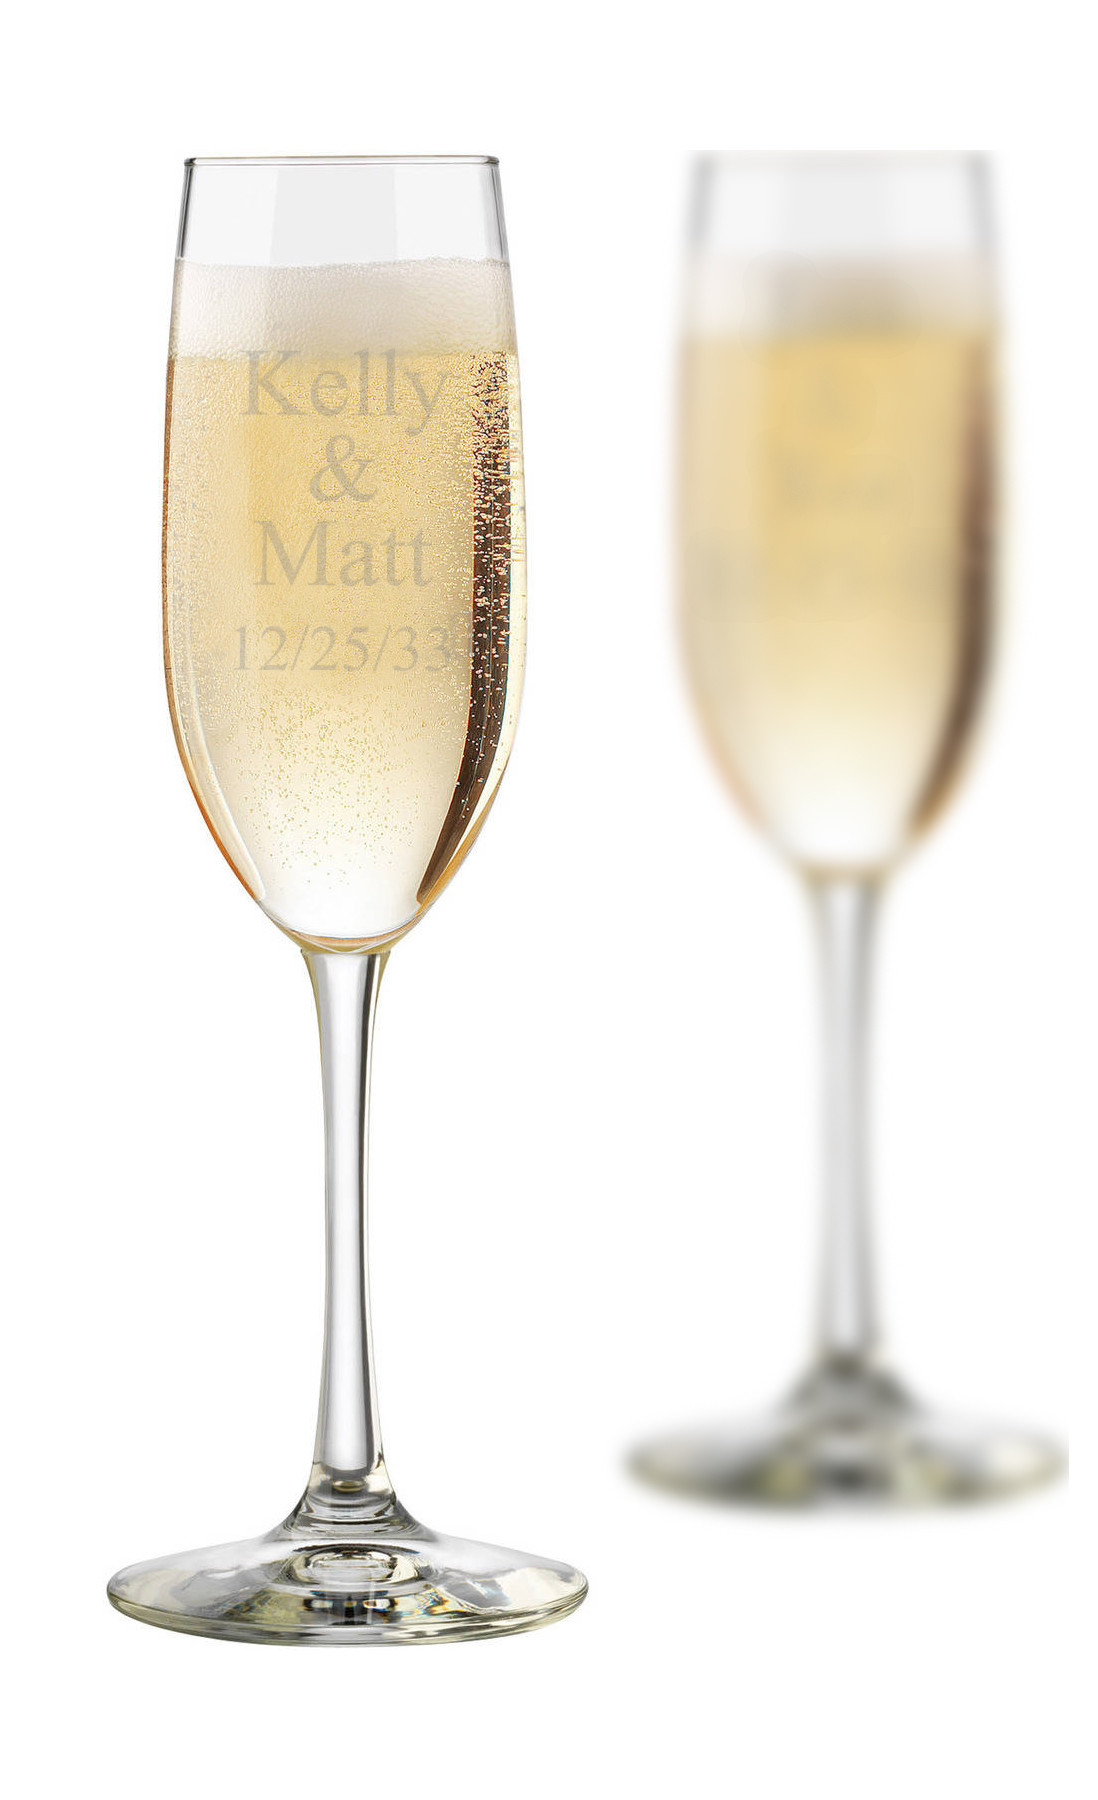 Engraved Toasting Flute Champagne Glass